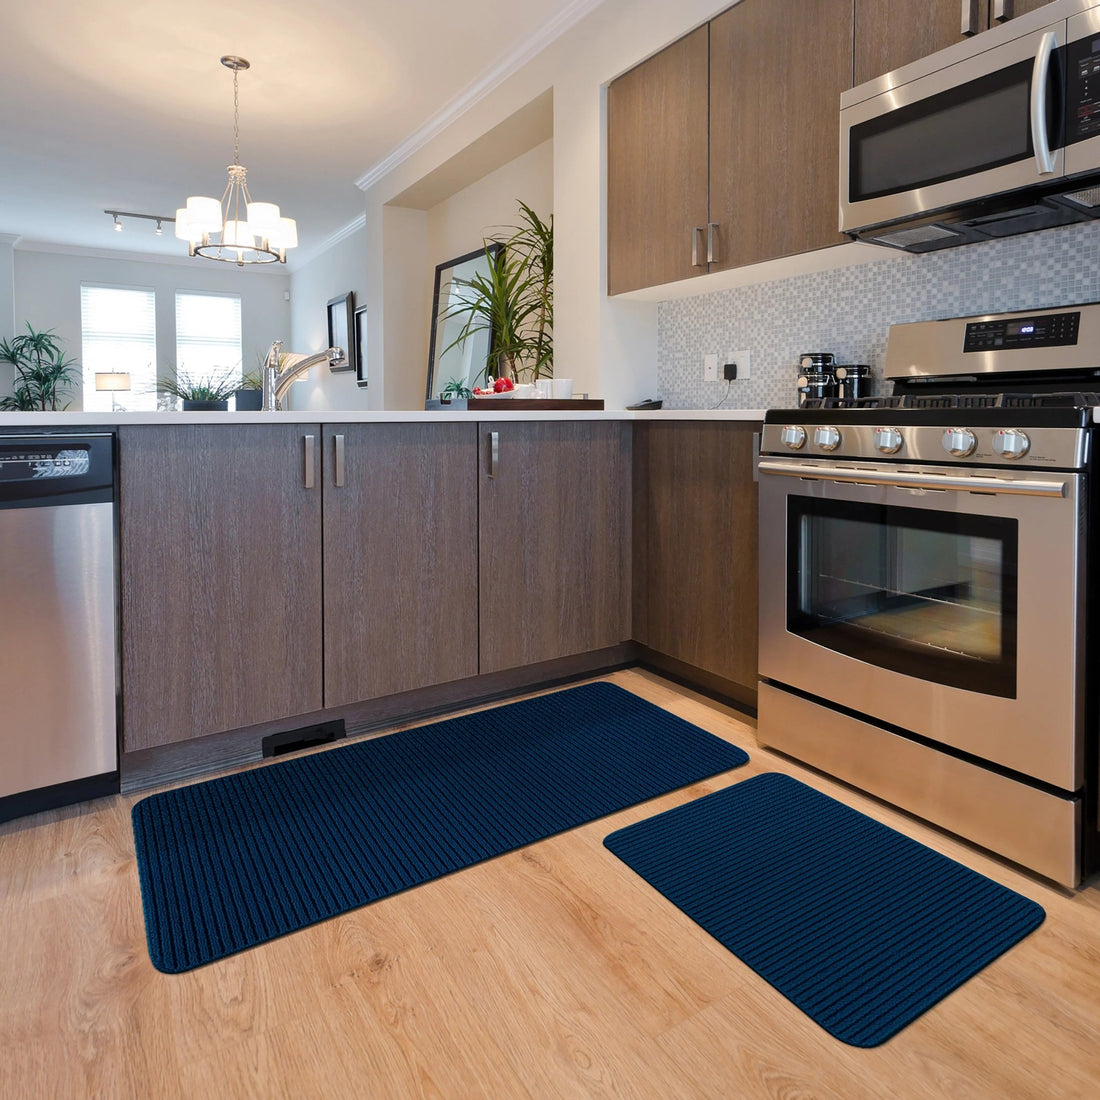 More Comfortable Floors with Beverly's Kitchen Rugs